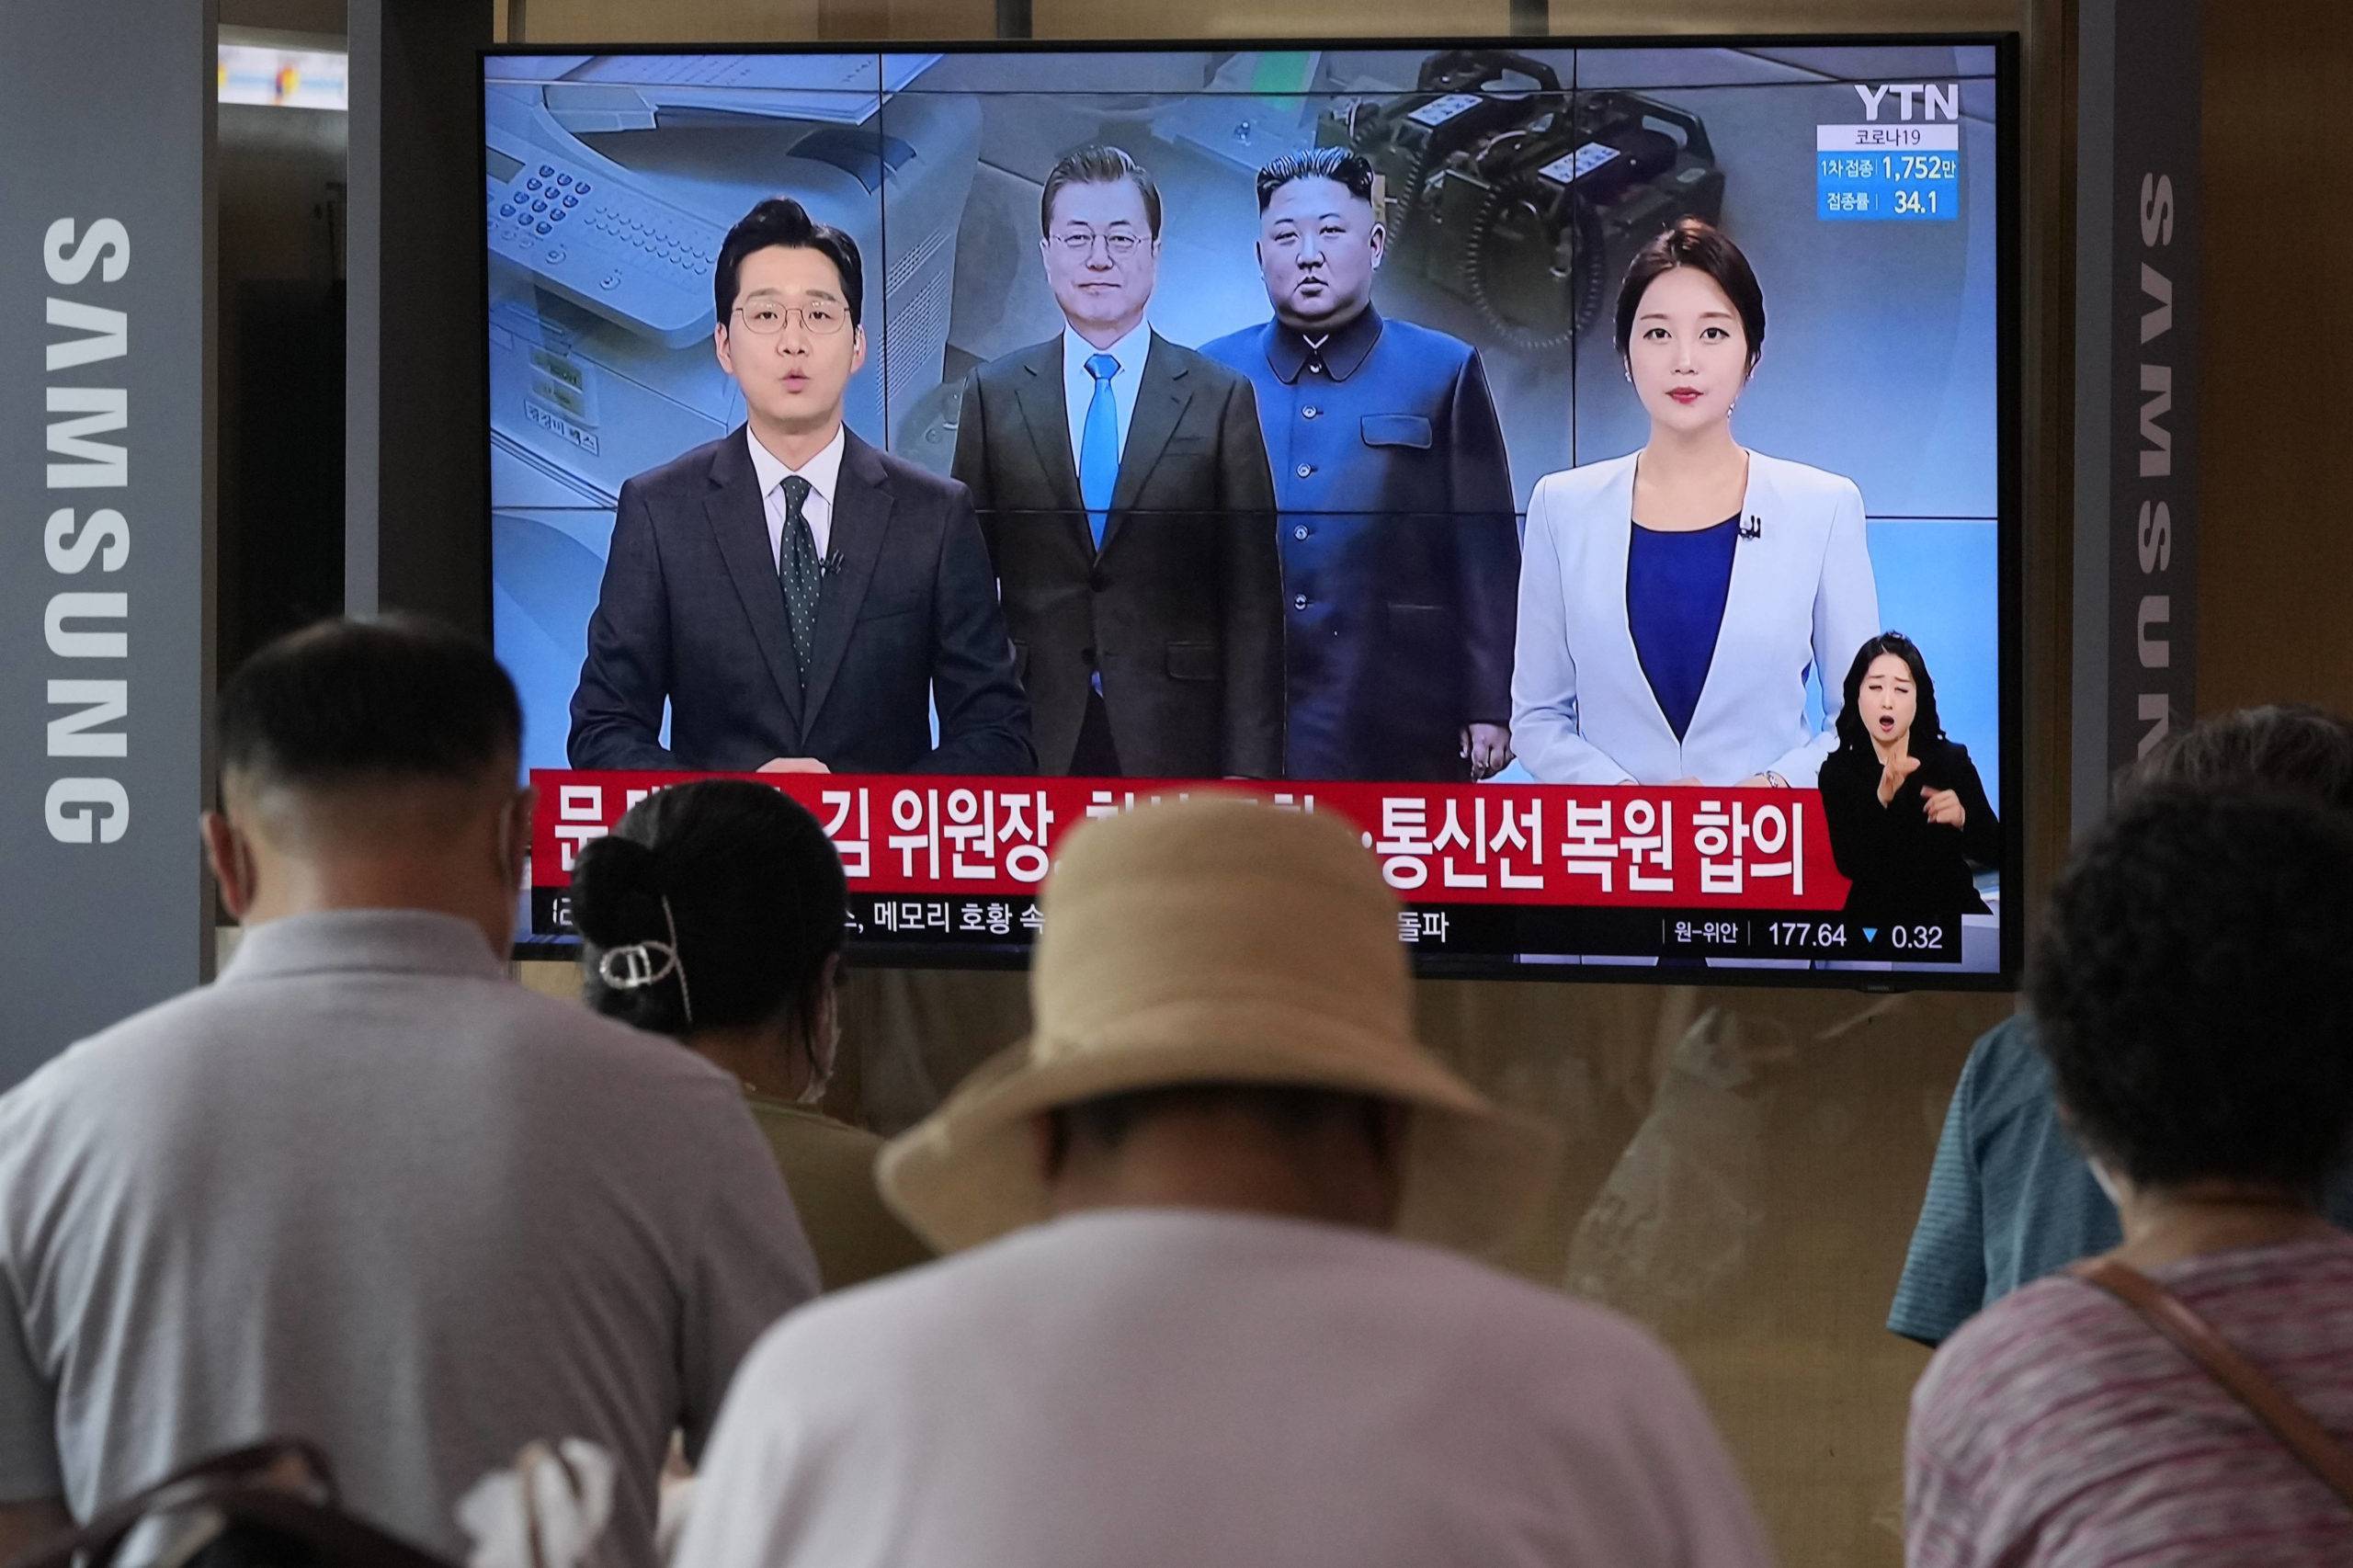 A TV shows a file image of North Korean leader Kim Jong Un, third from left, and South Korean President Moon Jae-in, second from left, during a news program at the Seoul Railway Station in Seoul, South Korea, Tuesday, July 27, 2021. North and South Korea restored suspended communication channels between them and their leaders agreed to improve ties, both governments said Tuesday, despite a 2 ½ year-stalemate in U.S.-led diplomacy aimed at stripping North Korea of its nuclear weapons. Korean letters read: "Moon Jae-in and Kim Jong Un agreed to restore communication channels." (AP Photo/Ahn Young-joon)/SEL103/21208165186177//2107270645